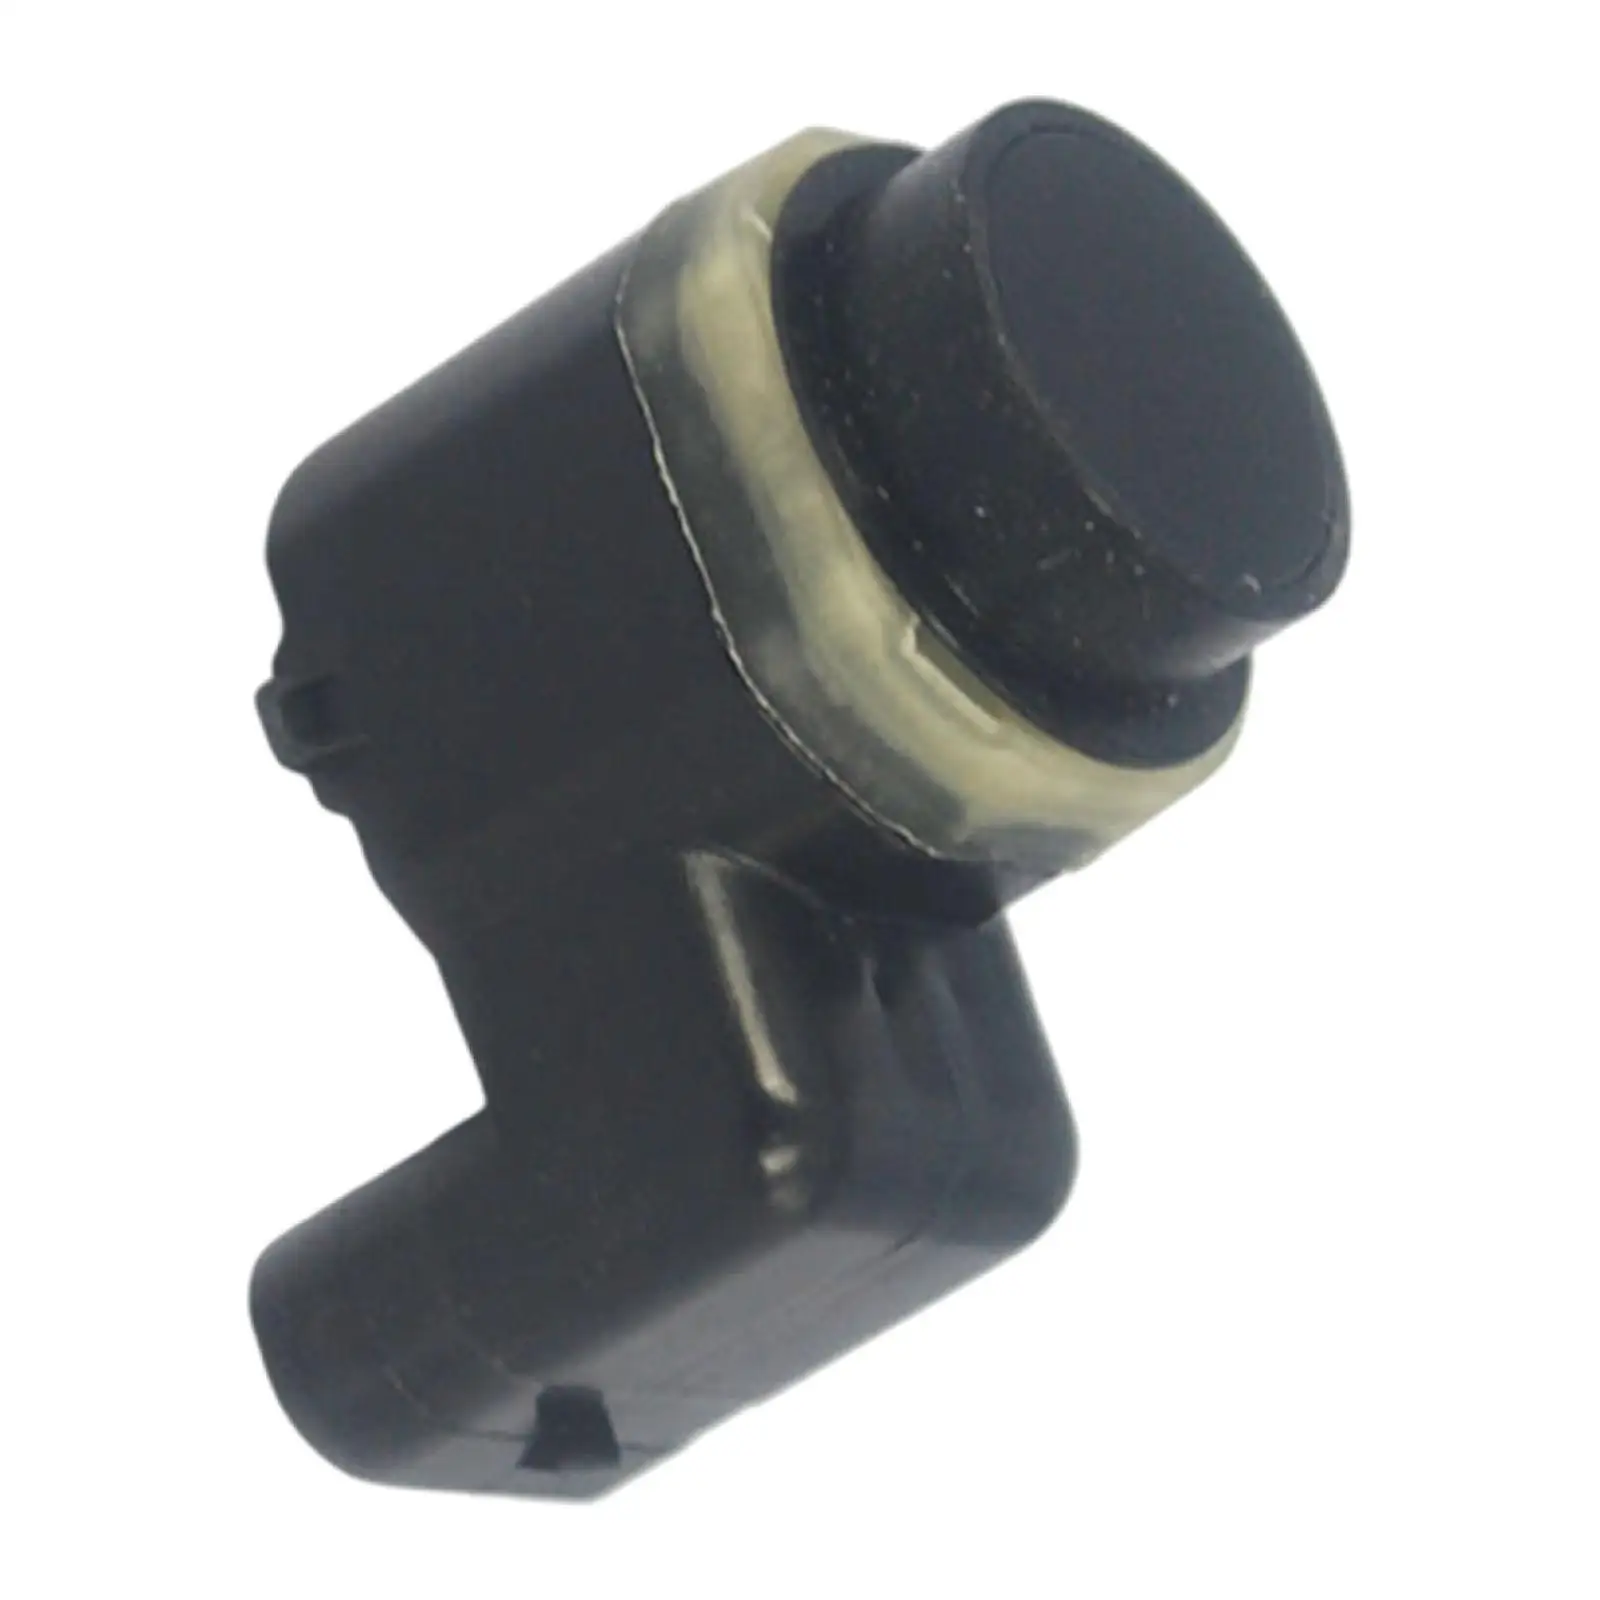 Parking Sensor for All New XF (x260) - Front Sensor Only